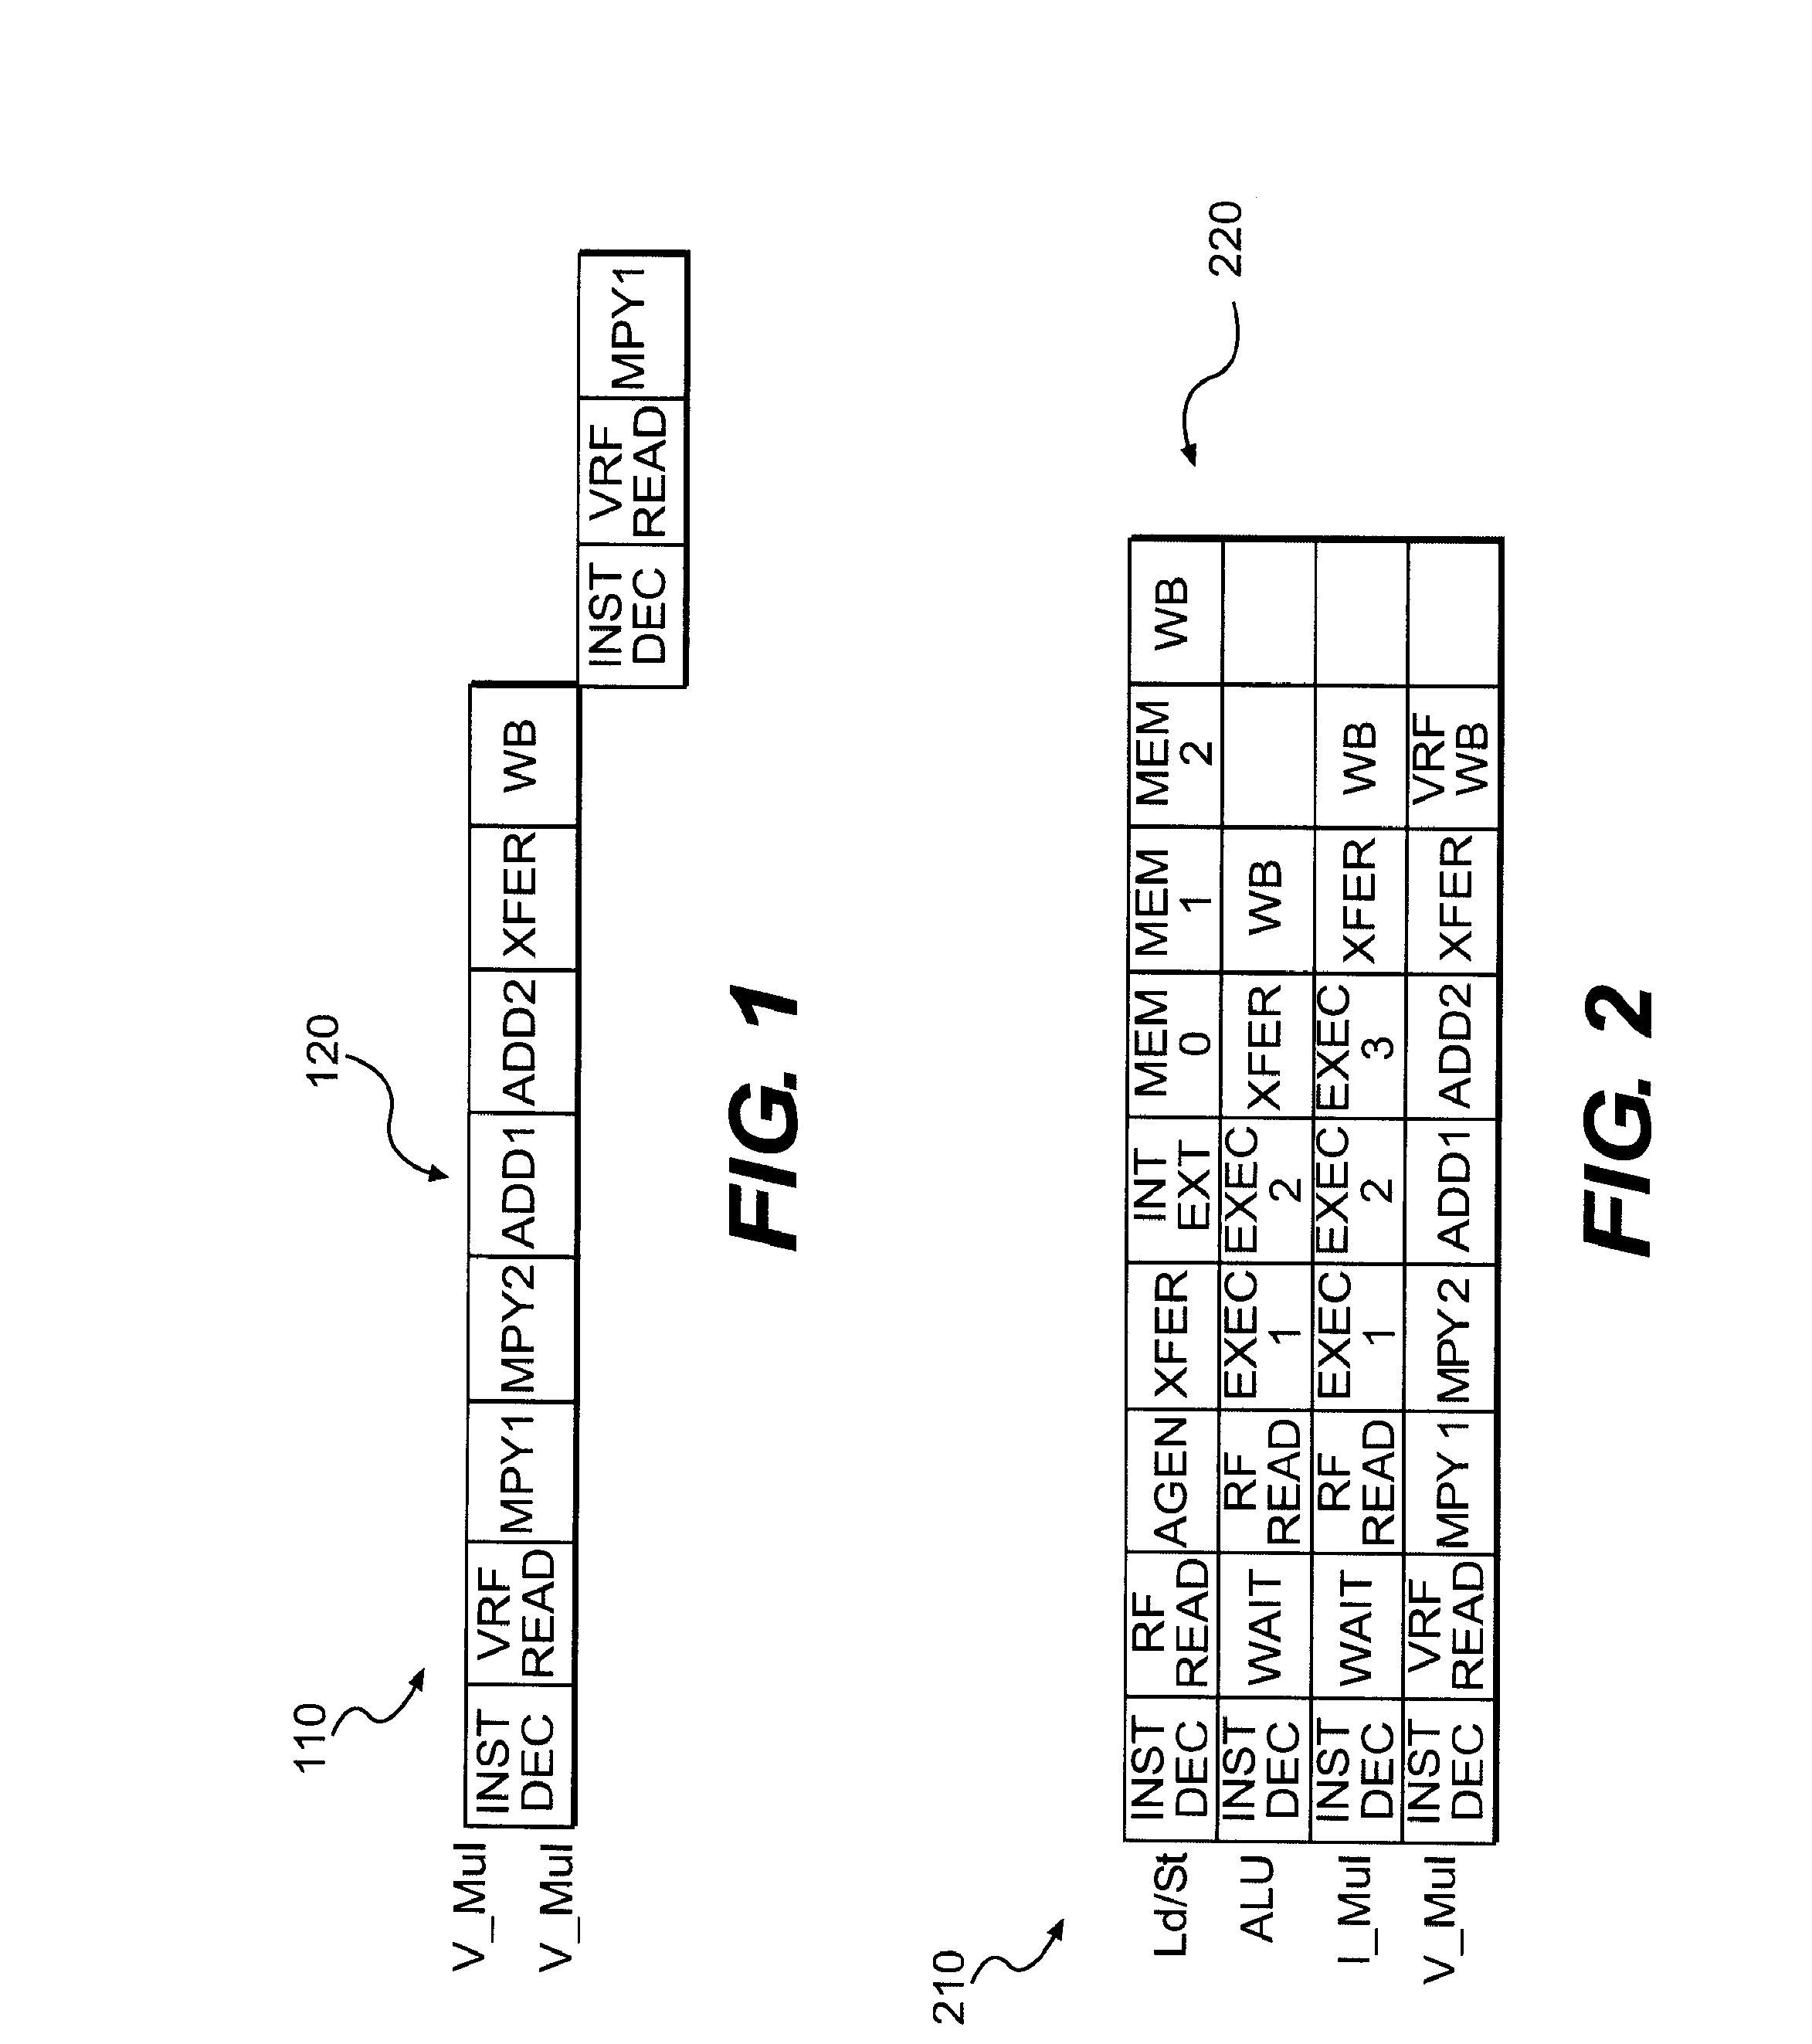 Software implementation of matrix inversion in a wireless communication system